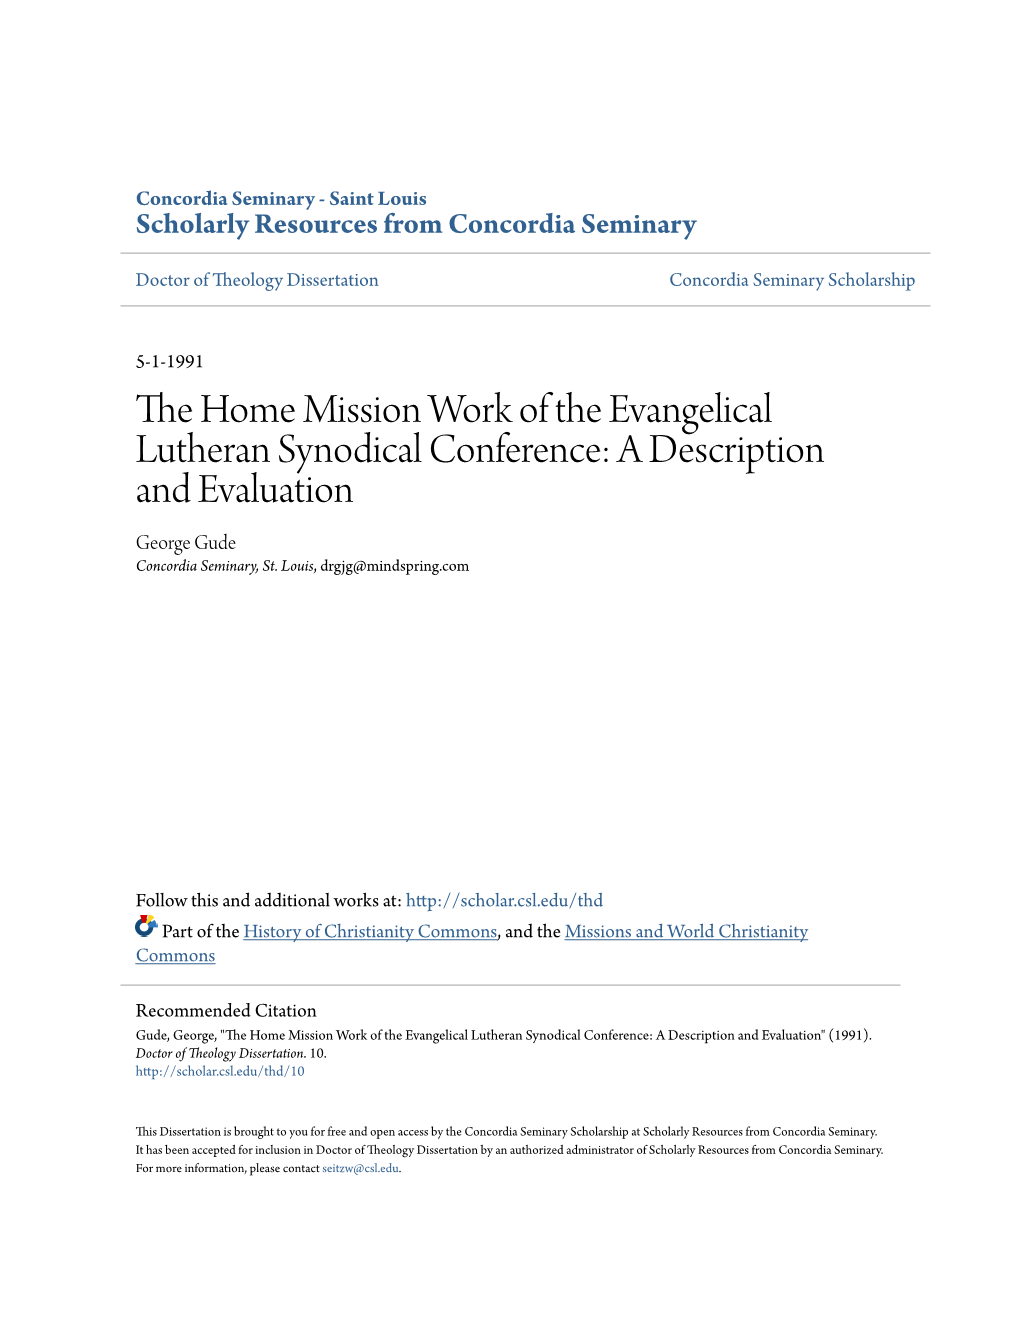 The Home Mission Work of the Evangelical Lutheran Synodical